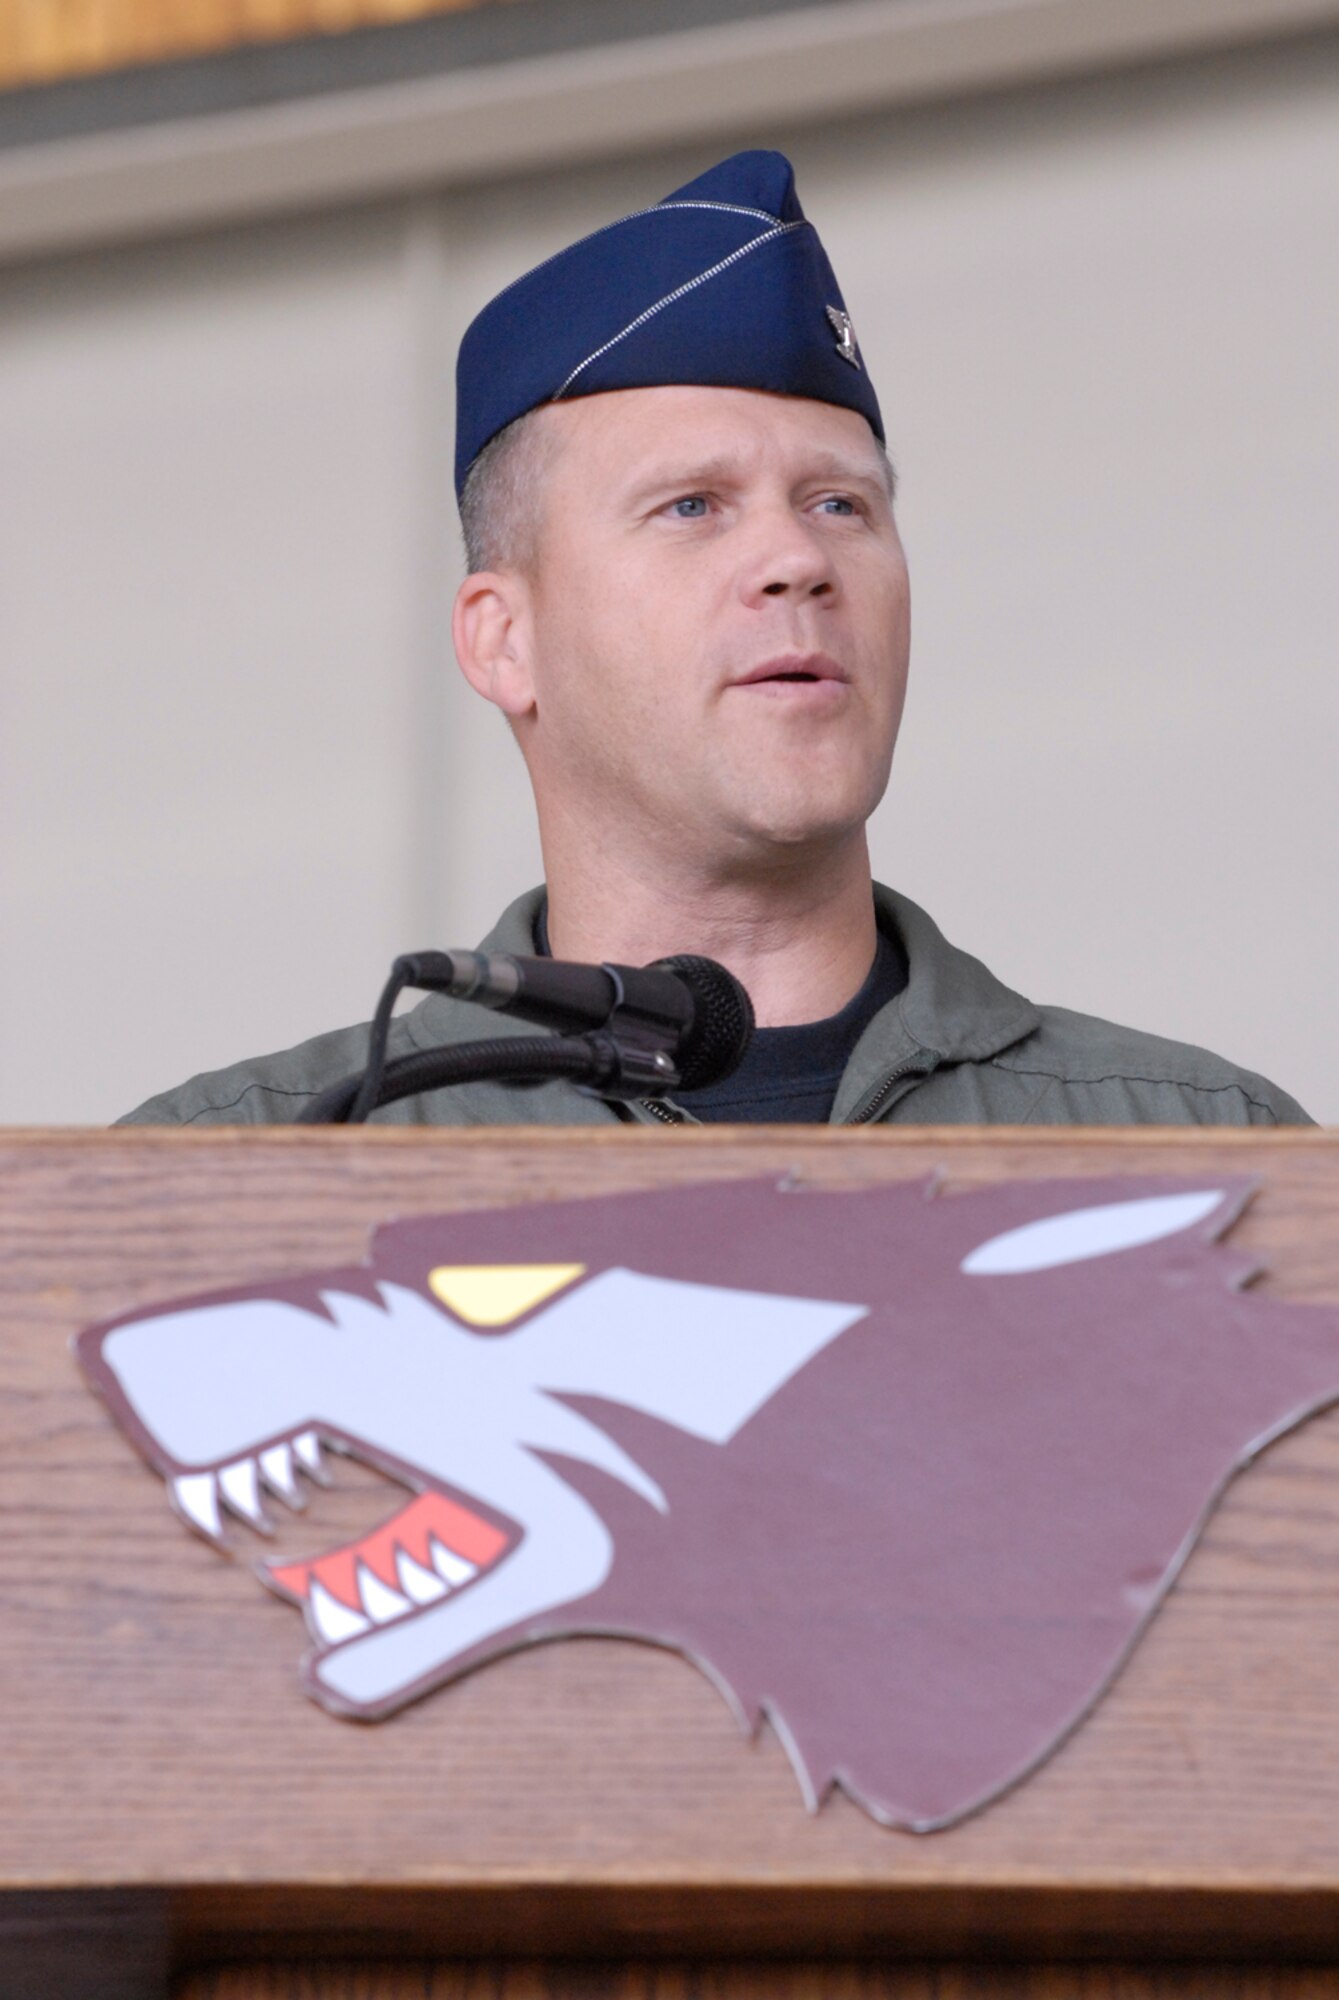 Colonel Jeff Lofgren, former 8th Fighter Wing commander, speaks to the wing and fellow Wolf Pack members one last time during the change of command ceremony here May 25. The colonel thanked Airmen for what they did everyday but also for being his family and sharing time with them. He continues his career at Headquarters Air Force at the Pentagon. (U.S. Air Force photo by Senior Airman Barry Loo)